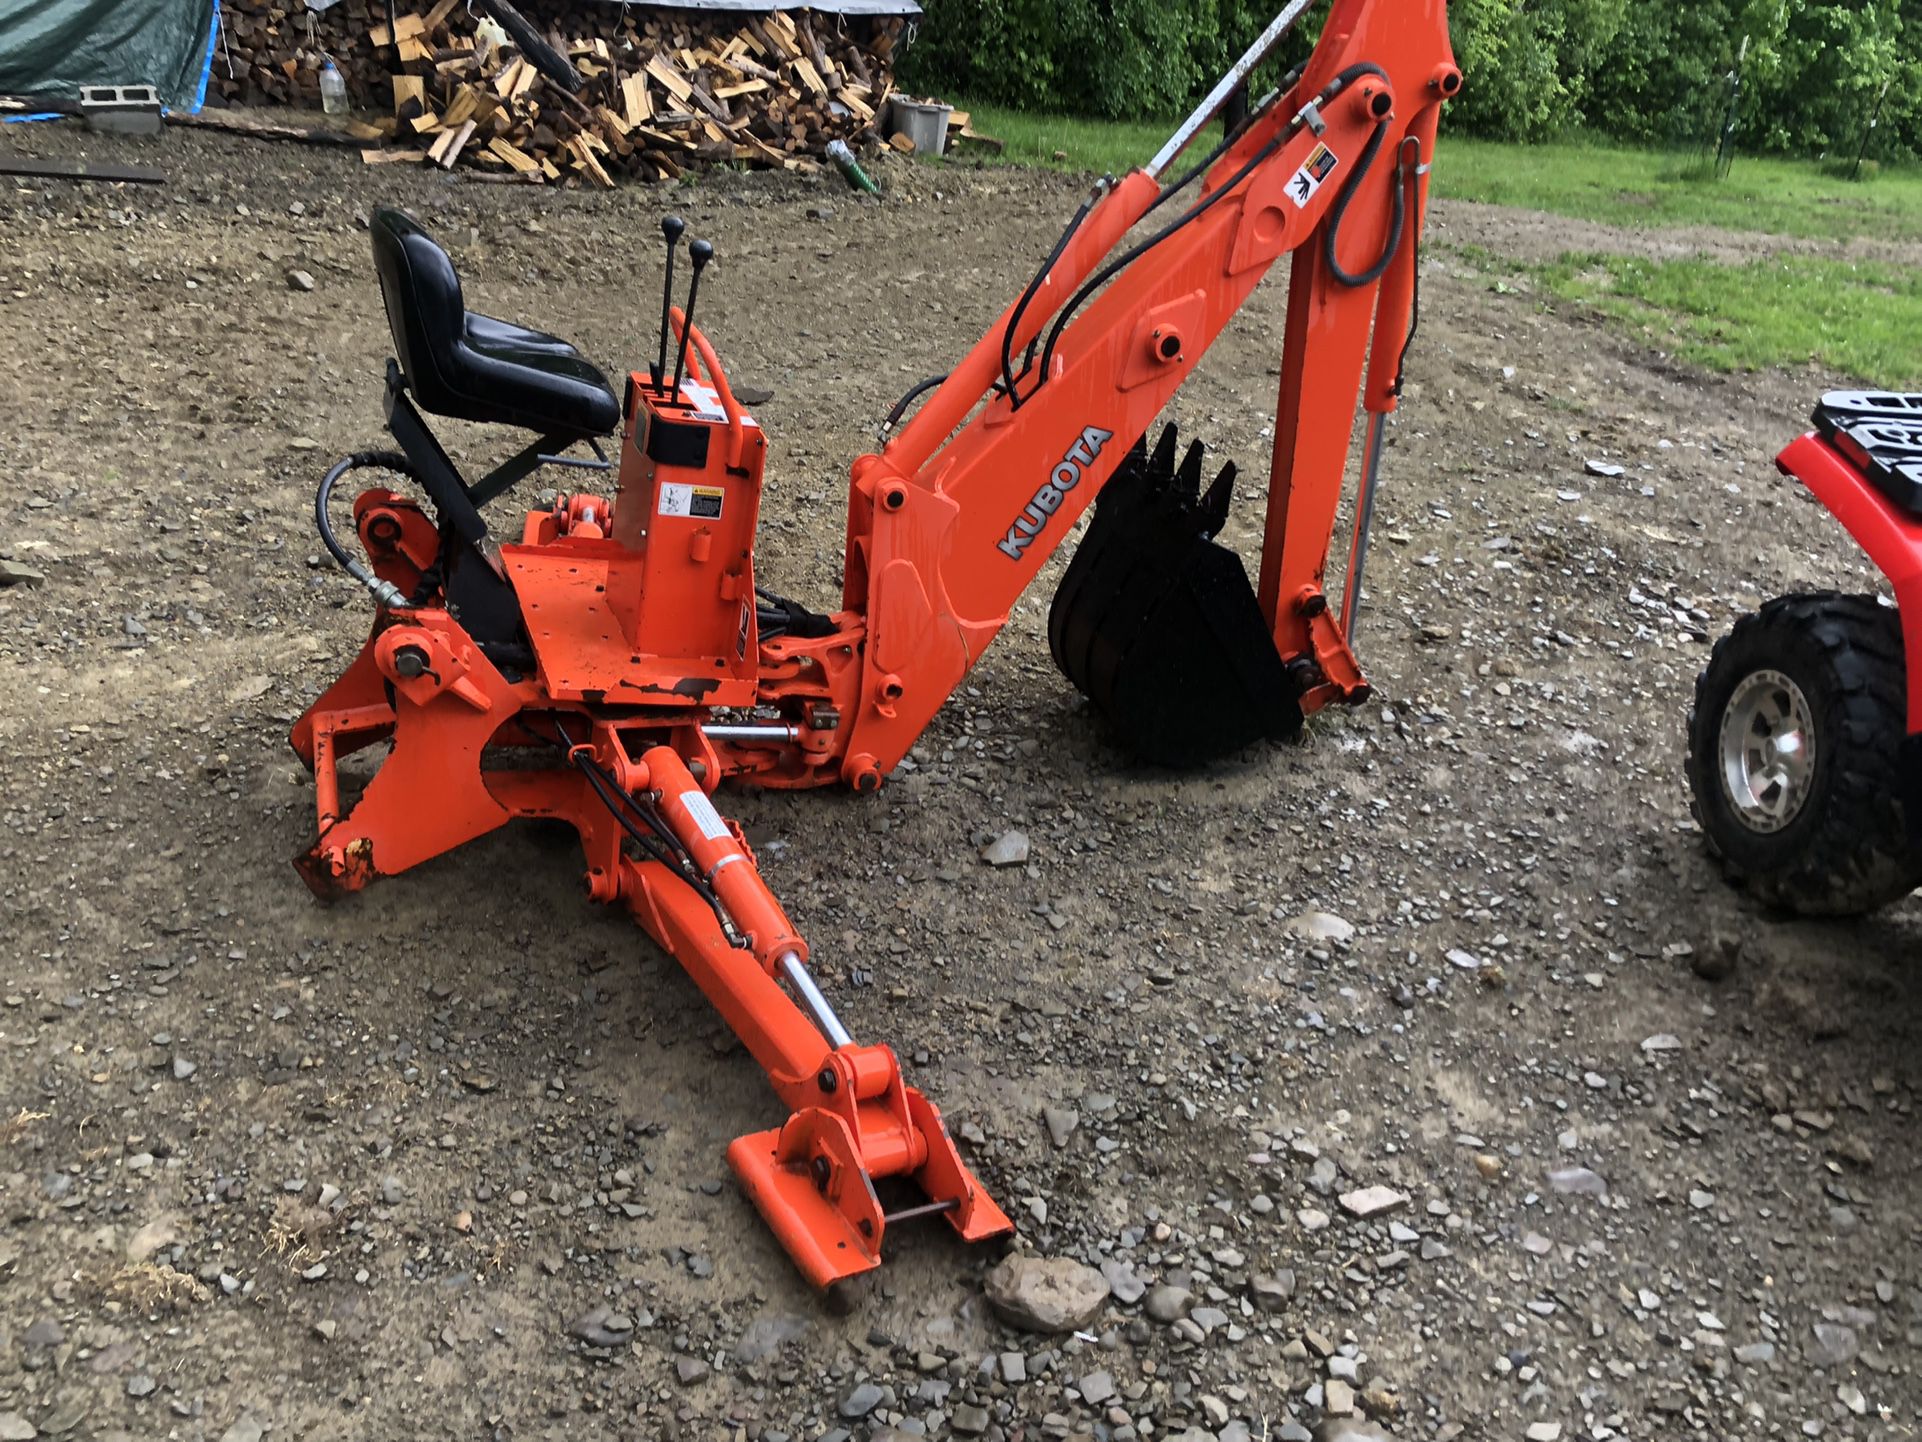 GENUINE KUBOTA BH90 BACKHOE ATTACHMENT ONLY $3500 READ WHOLE AD